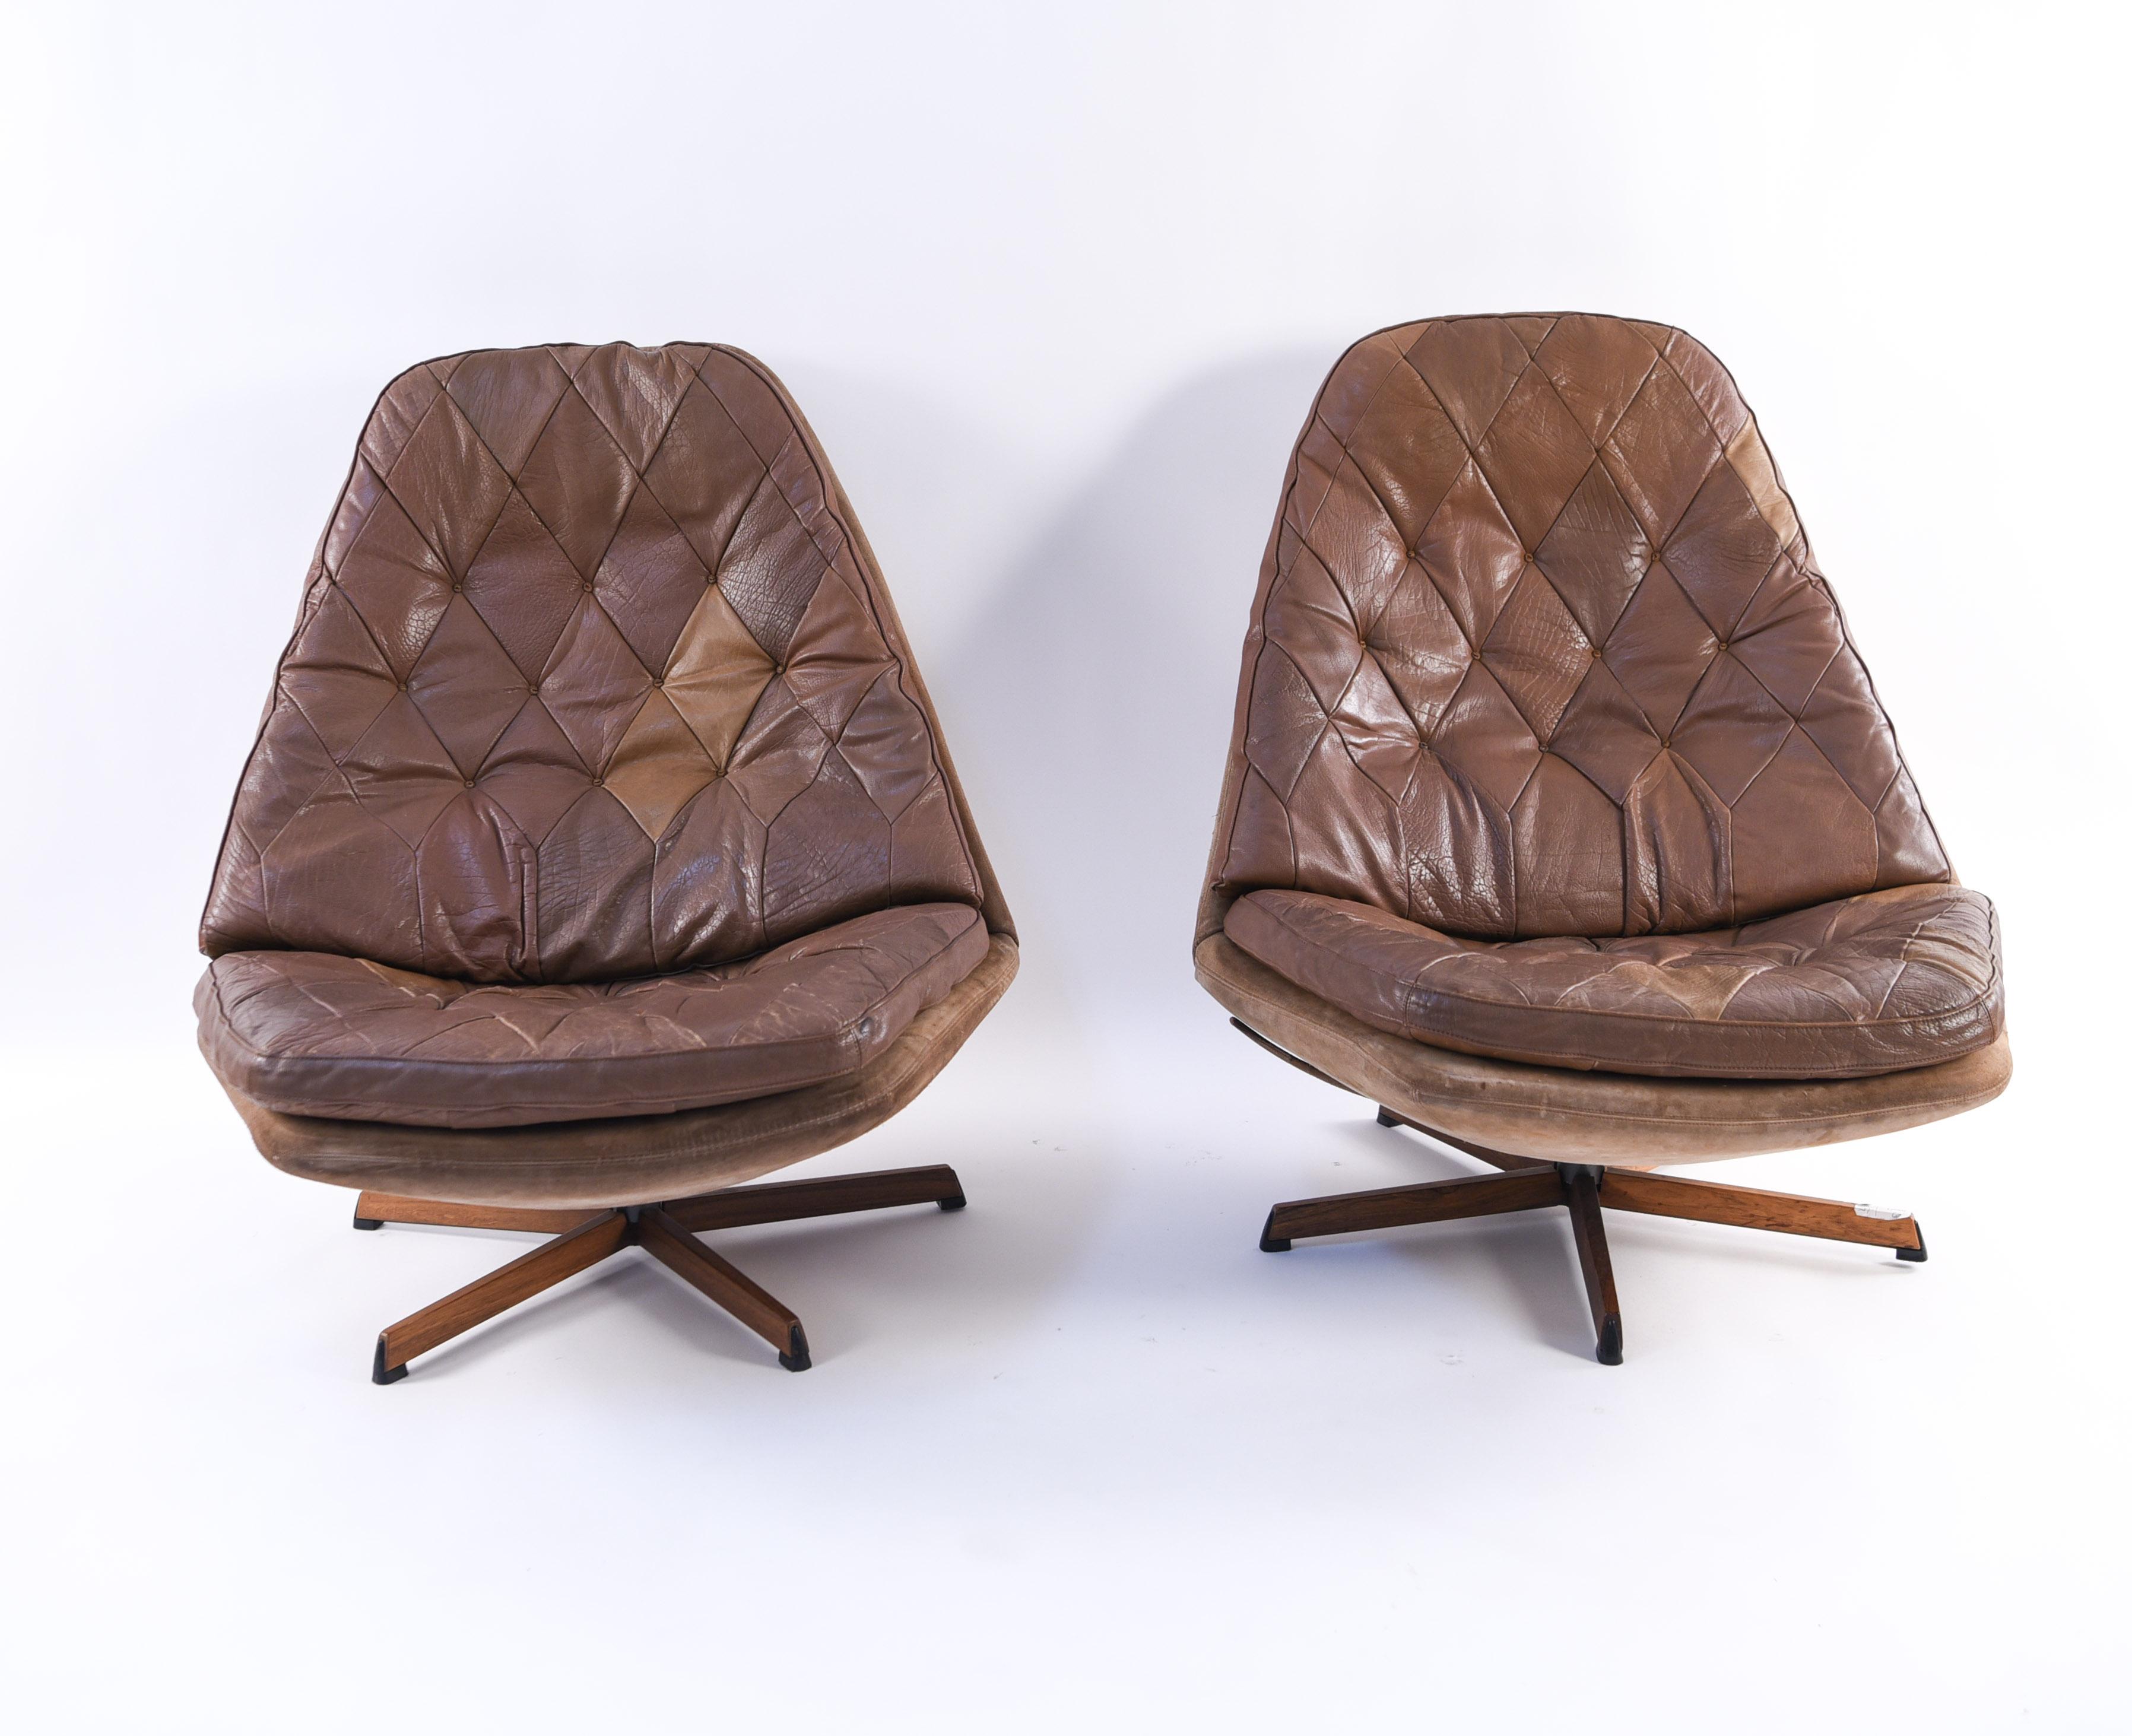 A pair of Danish midcentury swivel high back lounge chairs by esteemed producer Madsen and Schubell, model MS 68. The chairs are upholstered in a brown leather, the tufted design on which creates a pleasing diamond pattern.